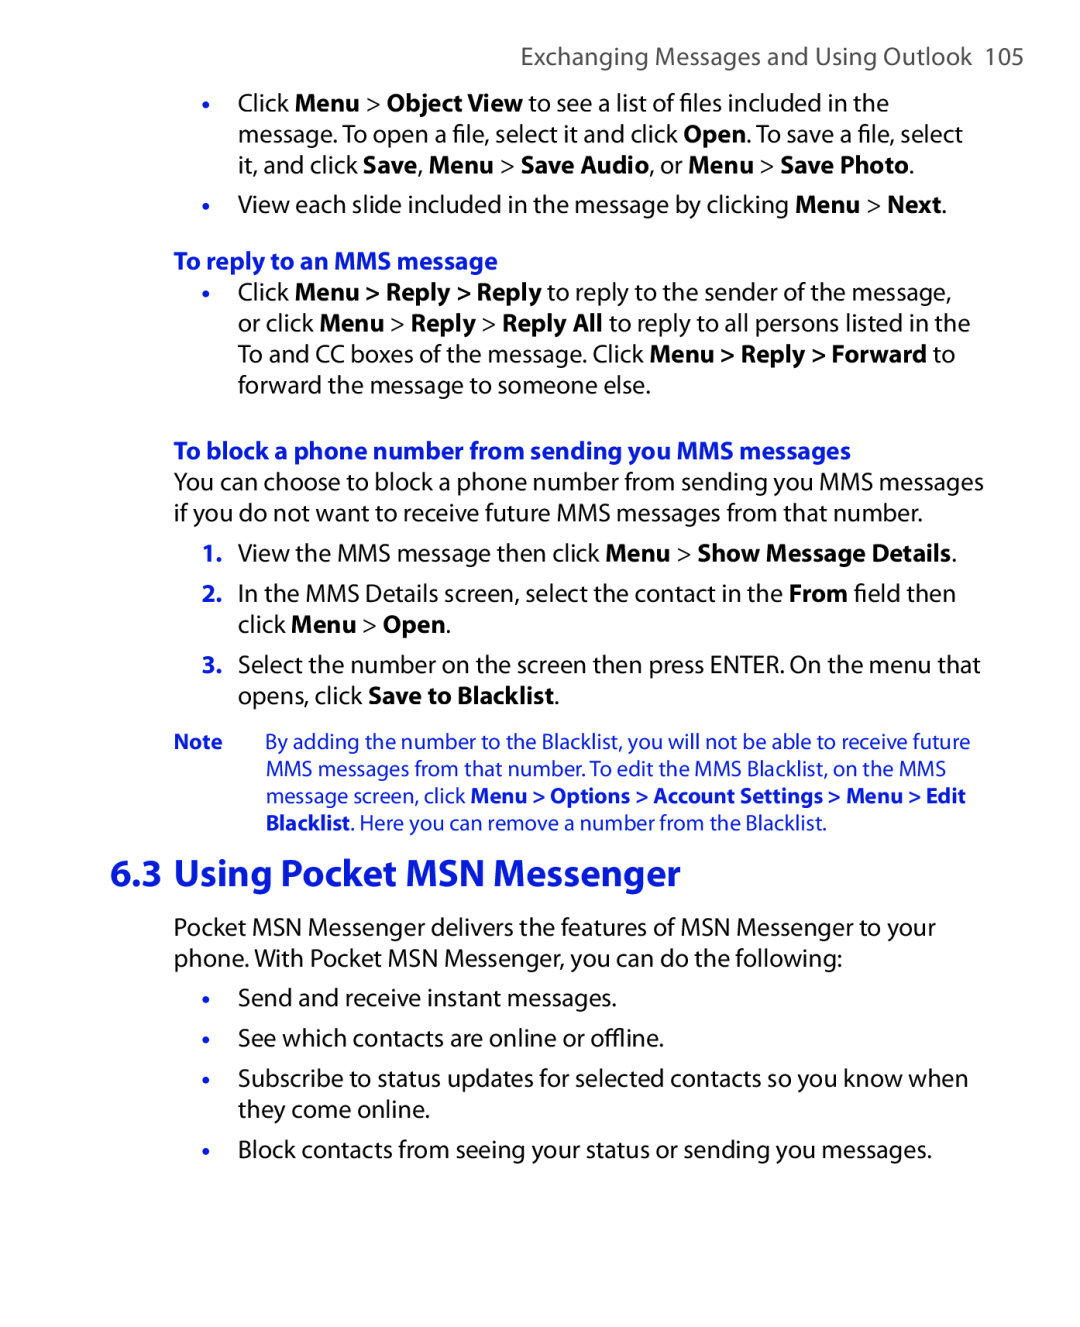 HTC HTC S621 user manual Using Pocket MSN Messenger, Exchanging Messages and Using Outlook, To reply to an MMS message 